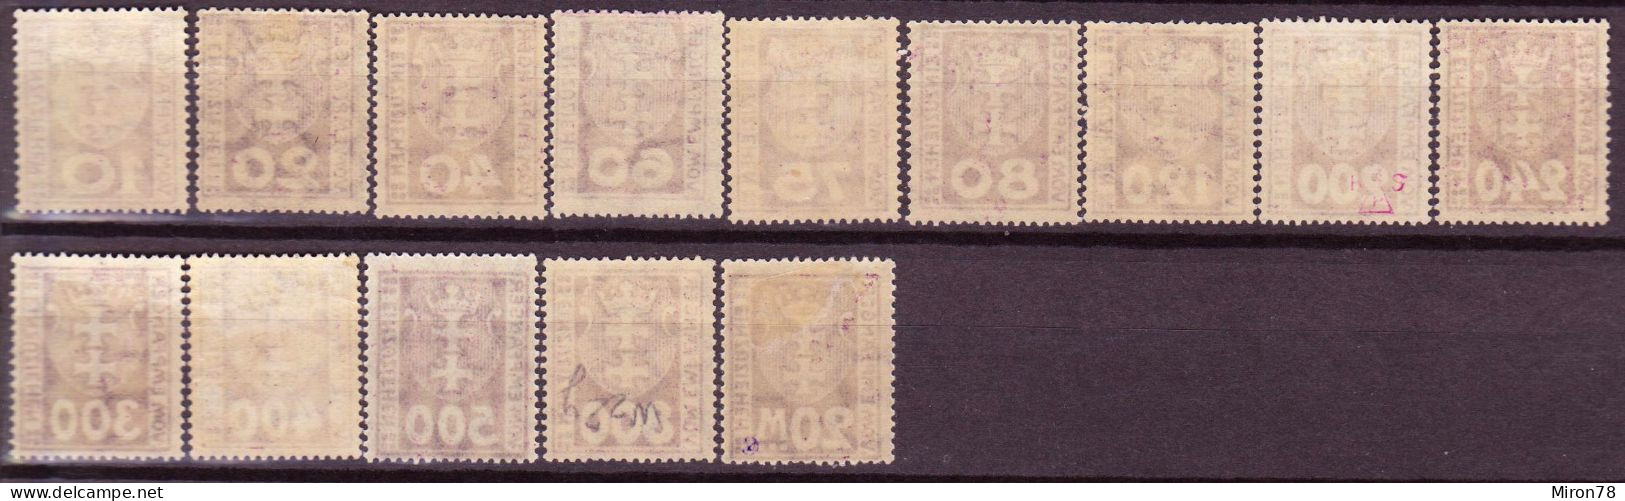 Stamps Danzig 1923 POSTAGE DUE STAMPS Mint MNH Lot6 - Taxe